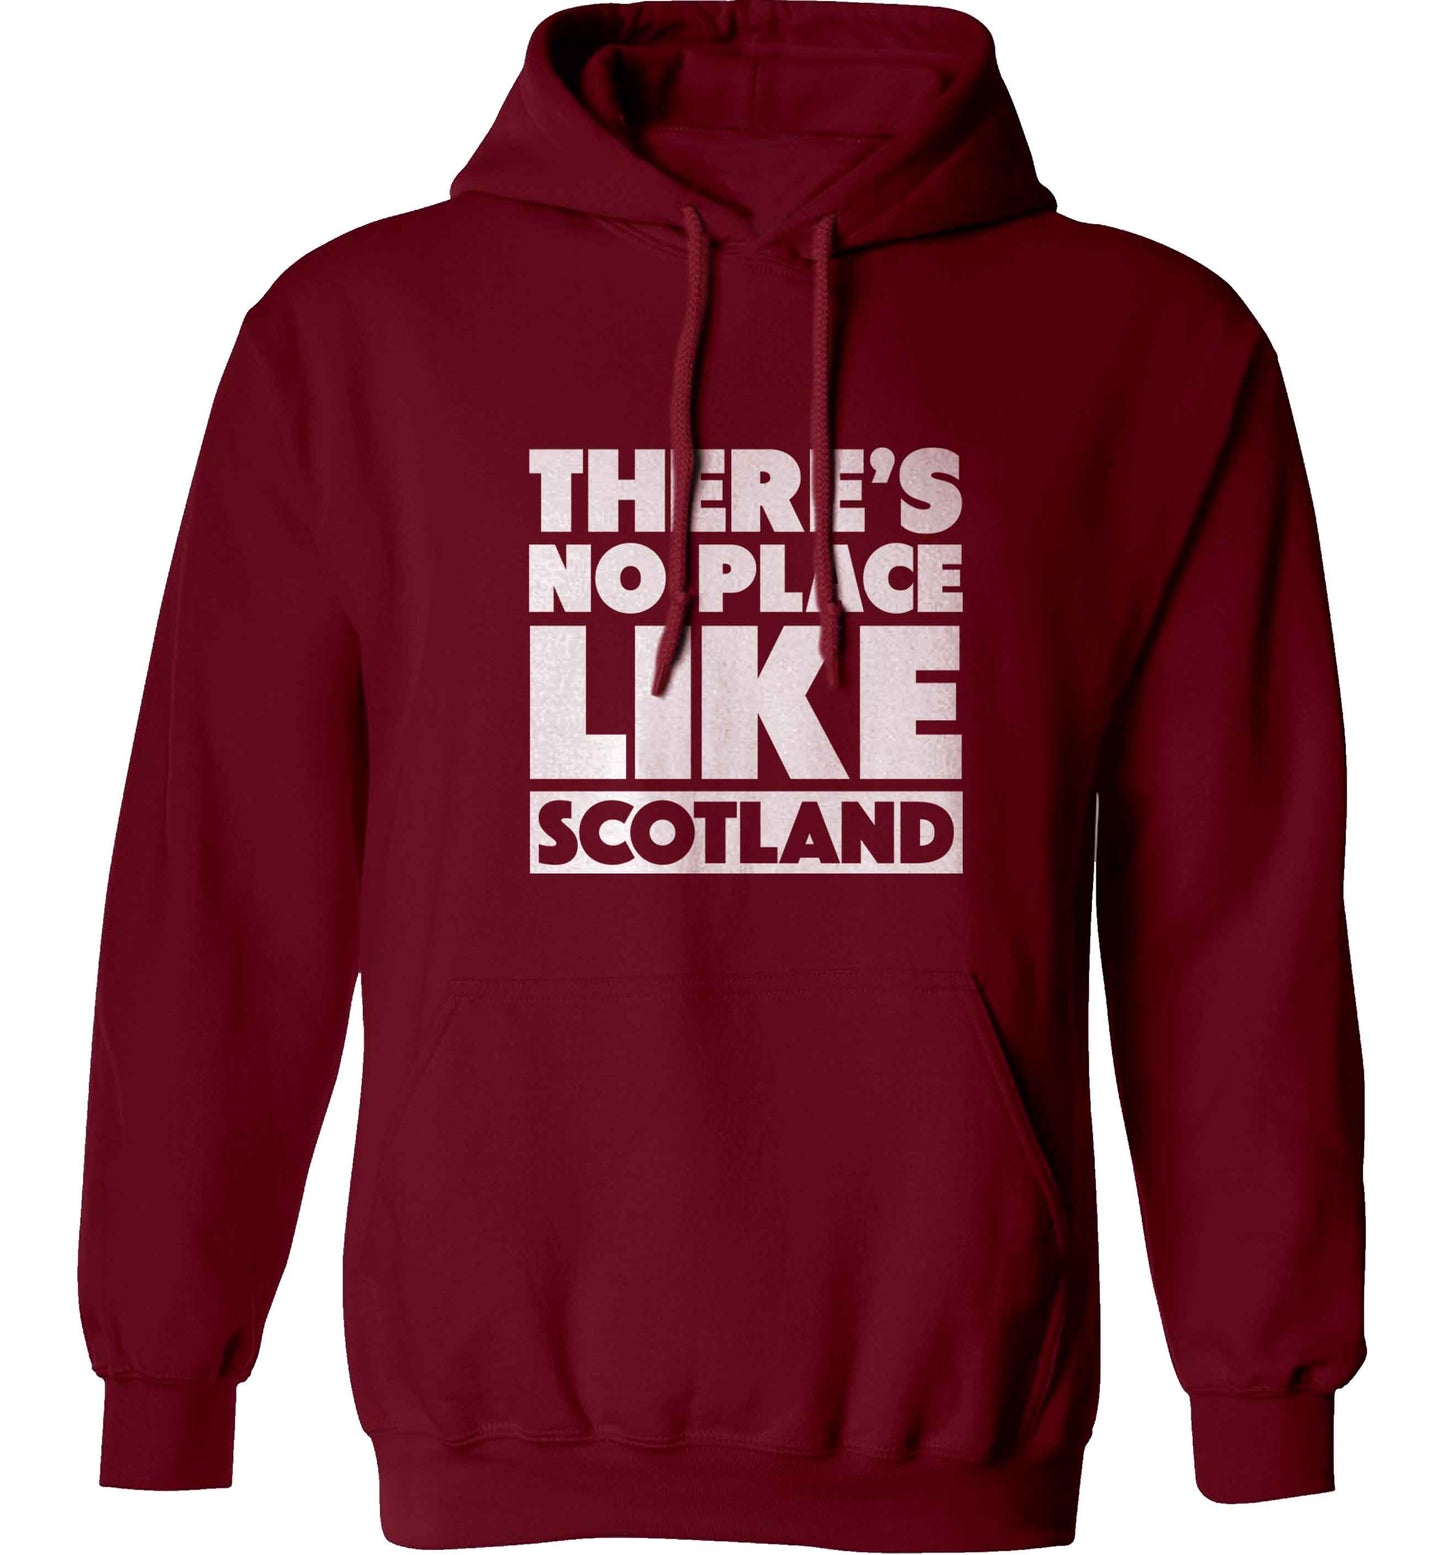 There's no place like Scotland adults unisex maroon hoodie 2XL